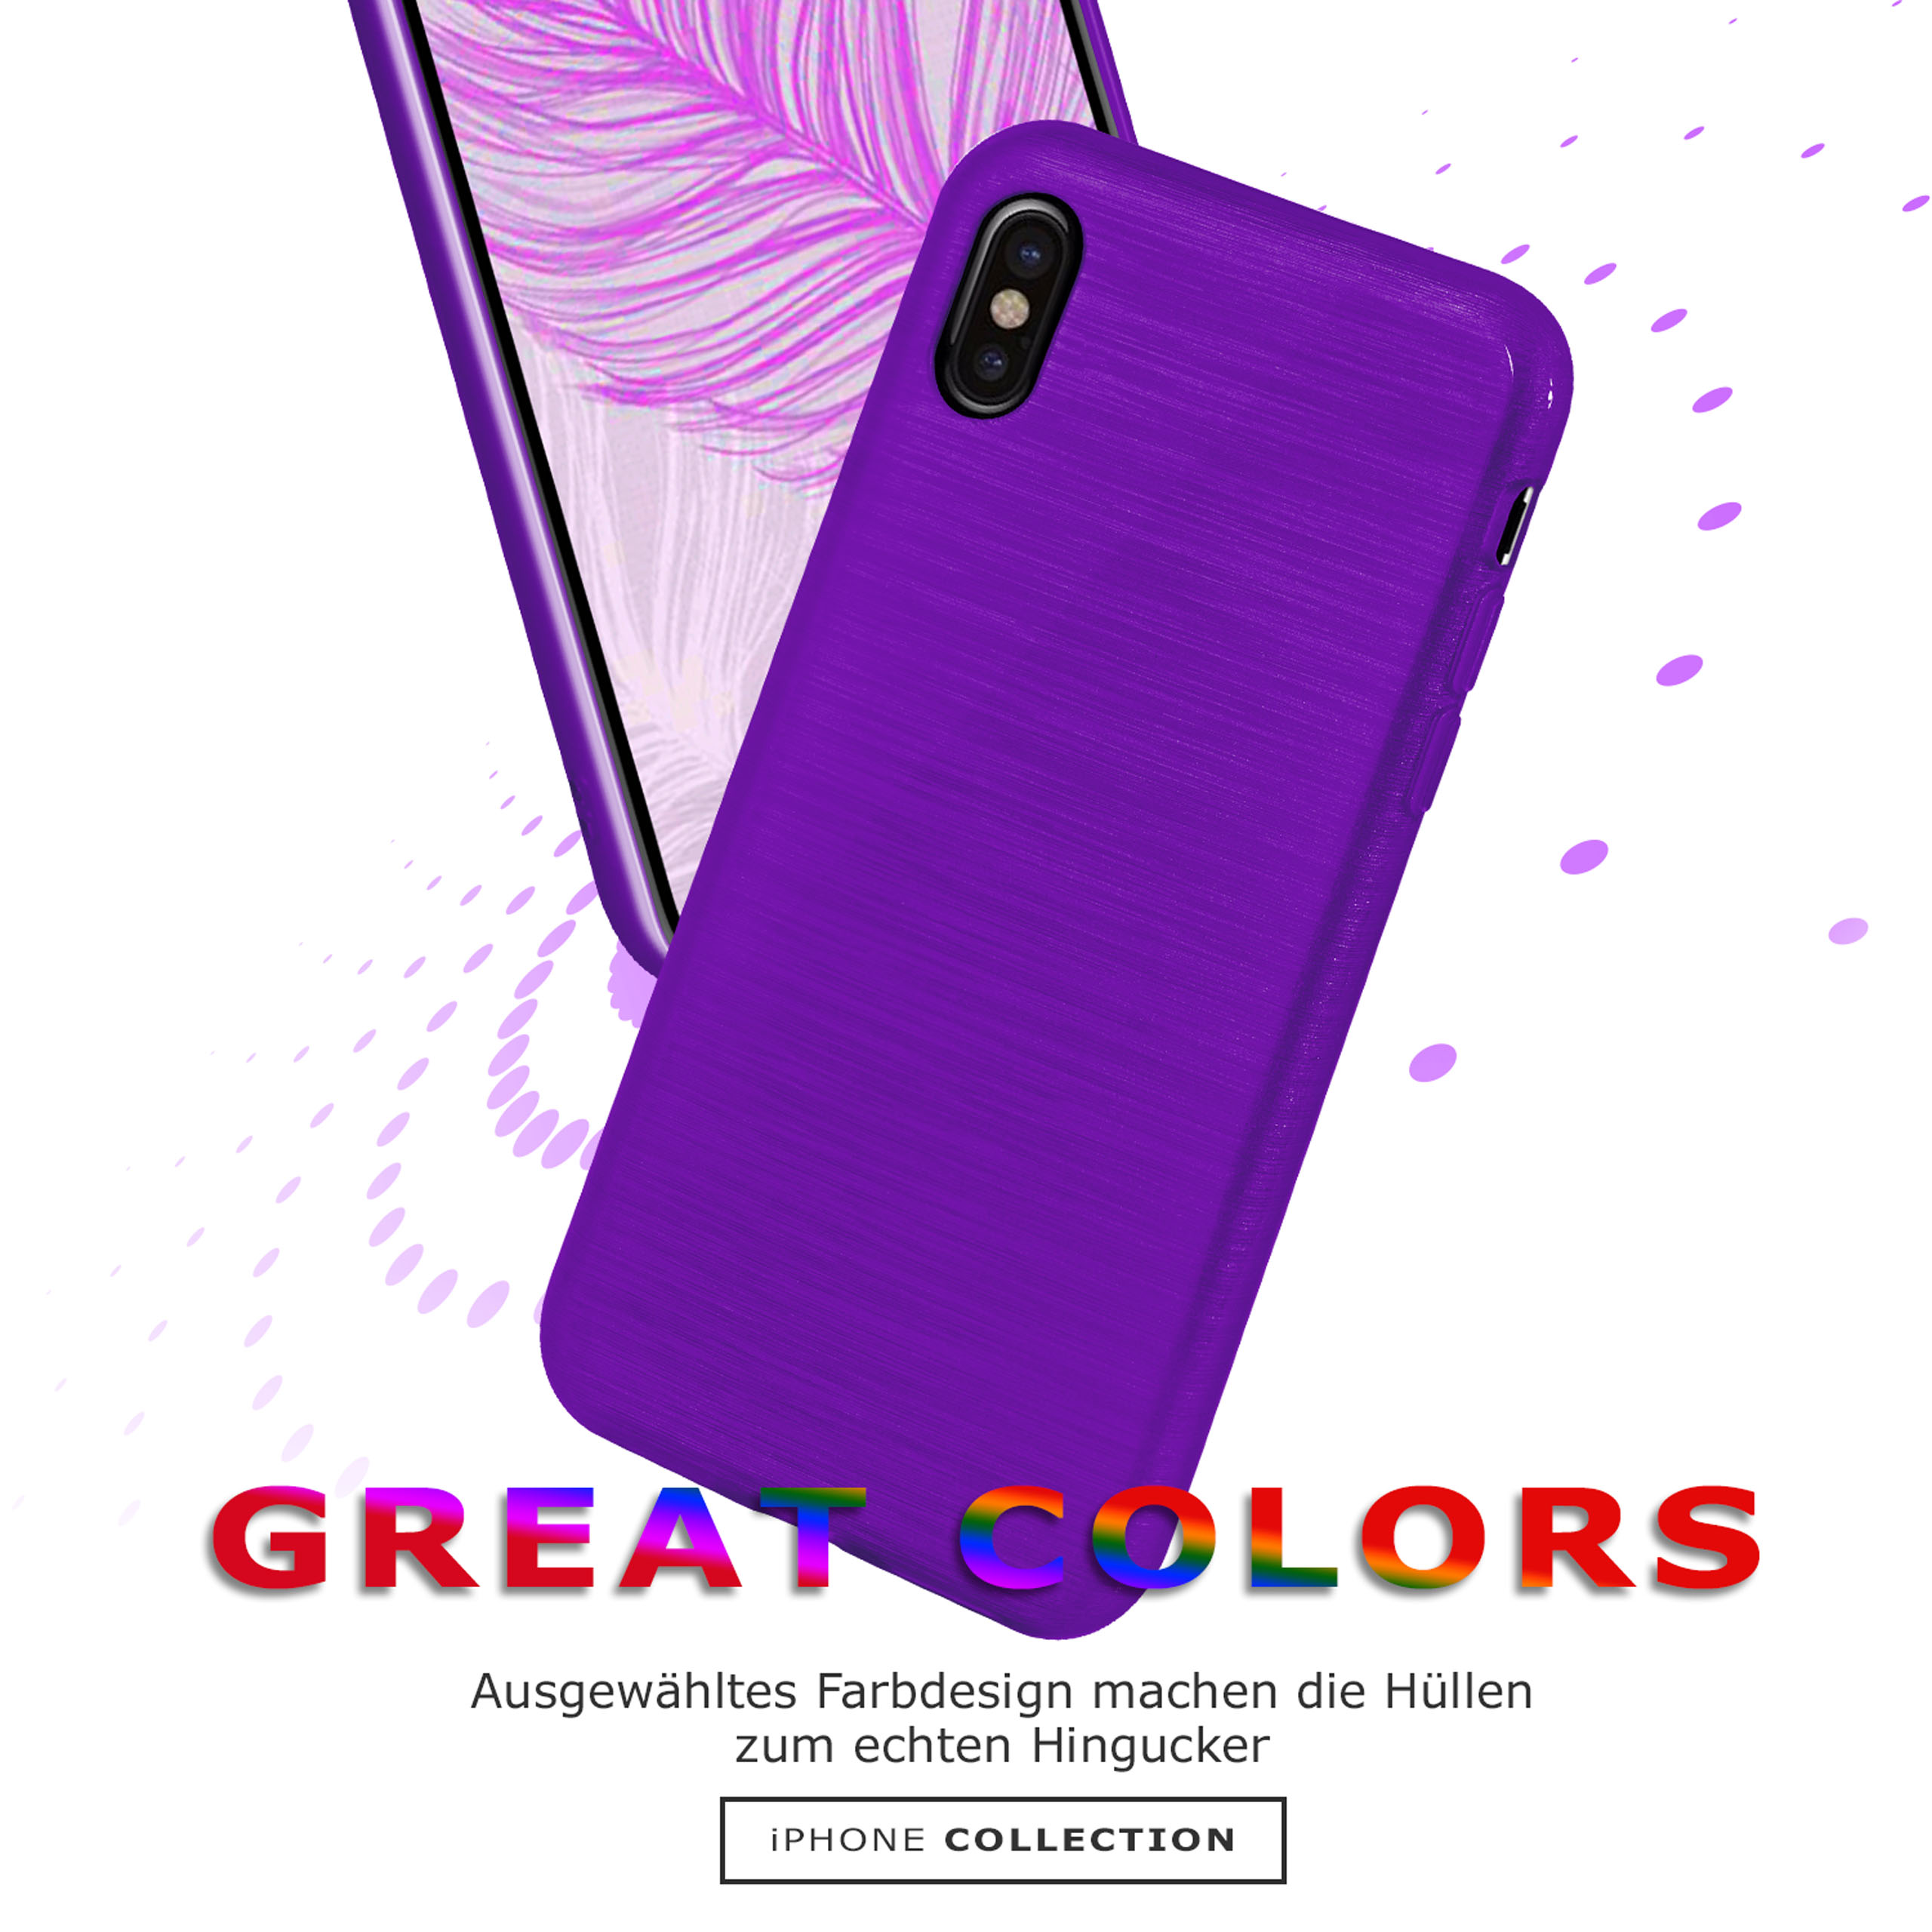 MOEX Brushed Case, Backcover, Purpure-Purple iPhone iPhone X Apple, / XS